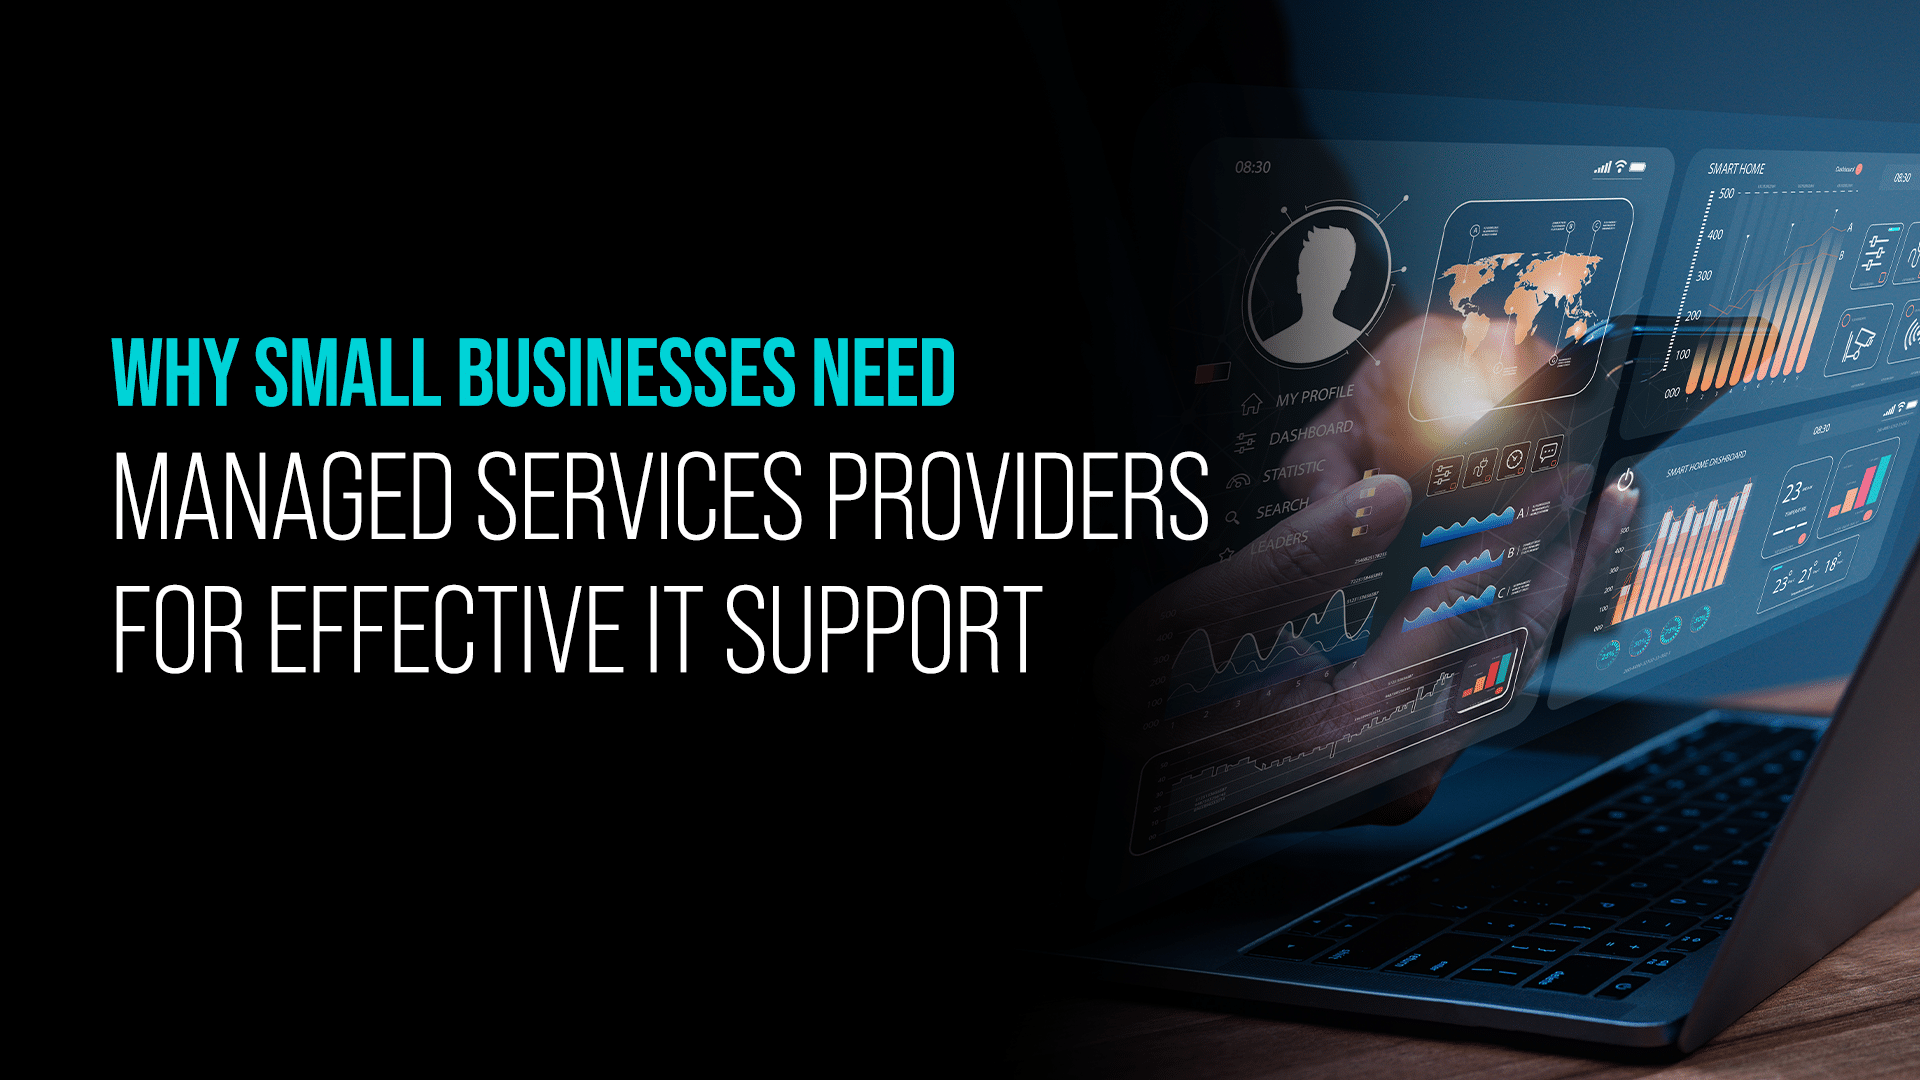 Why Small Businesses Need Managed Services Providers for Effective IT Support